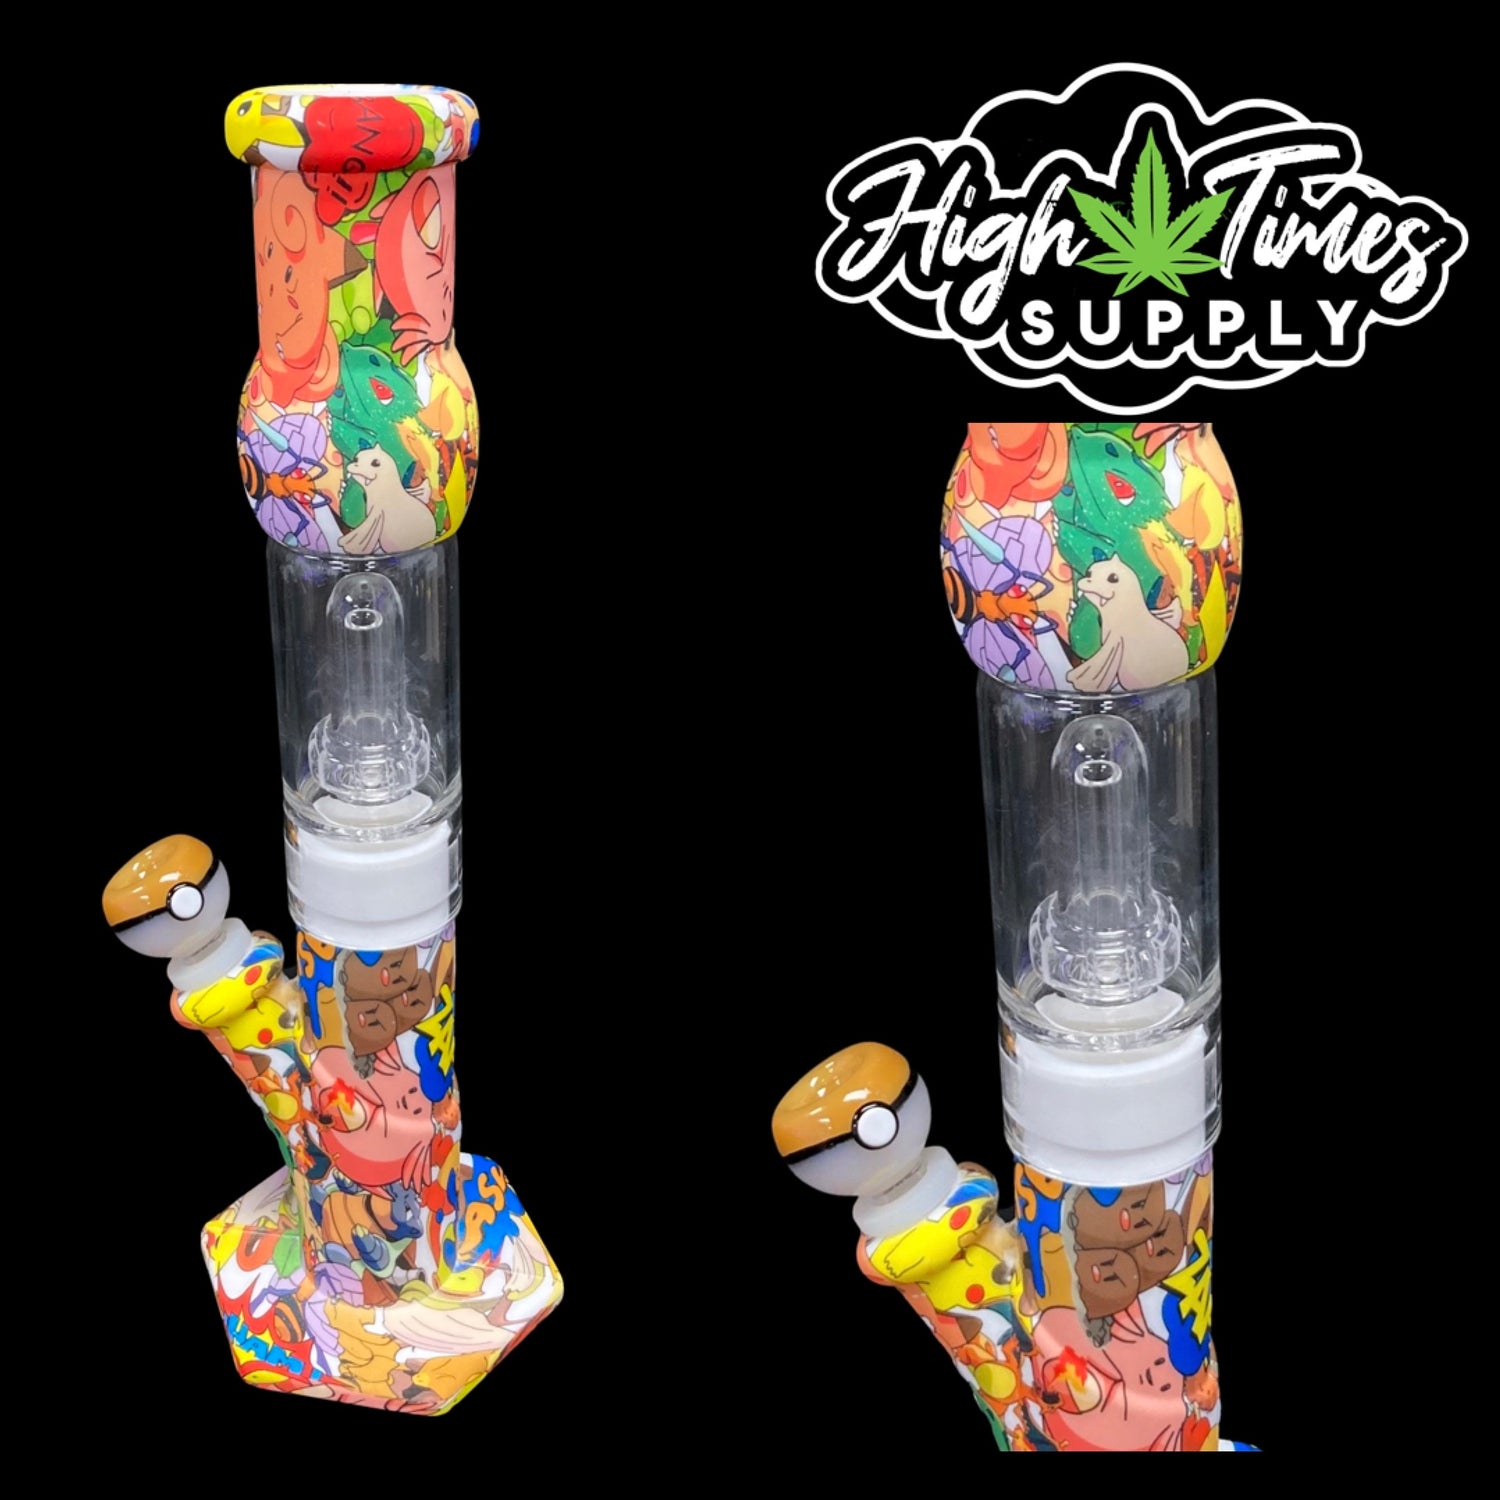 Rick and Morty – High Times Supply